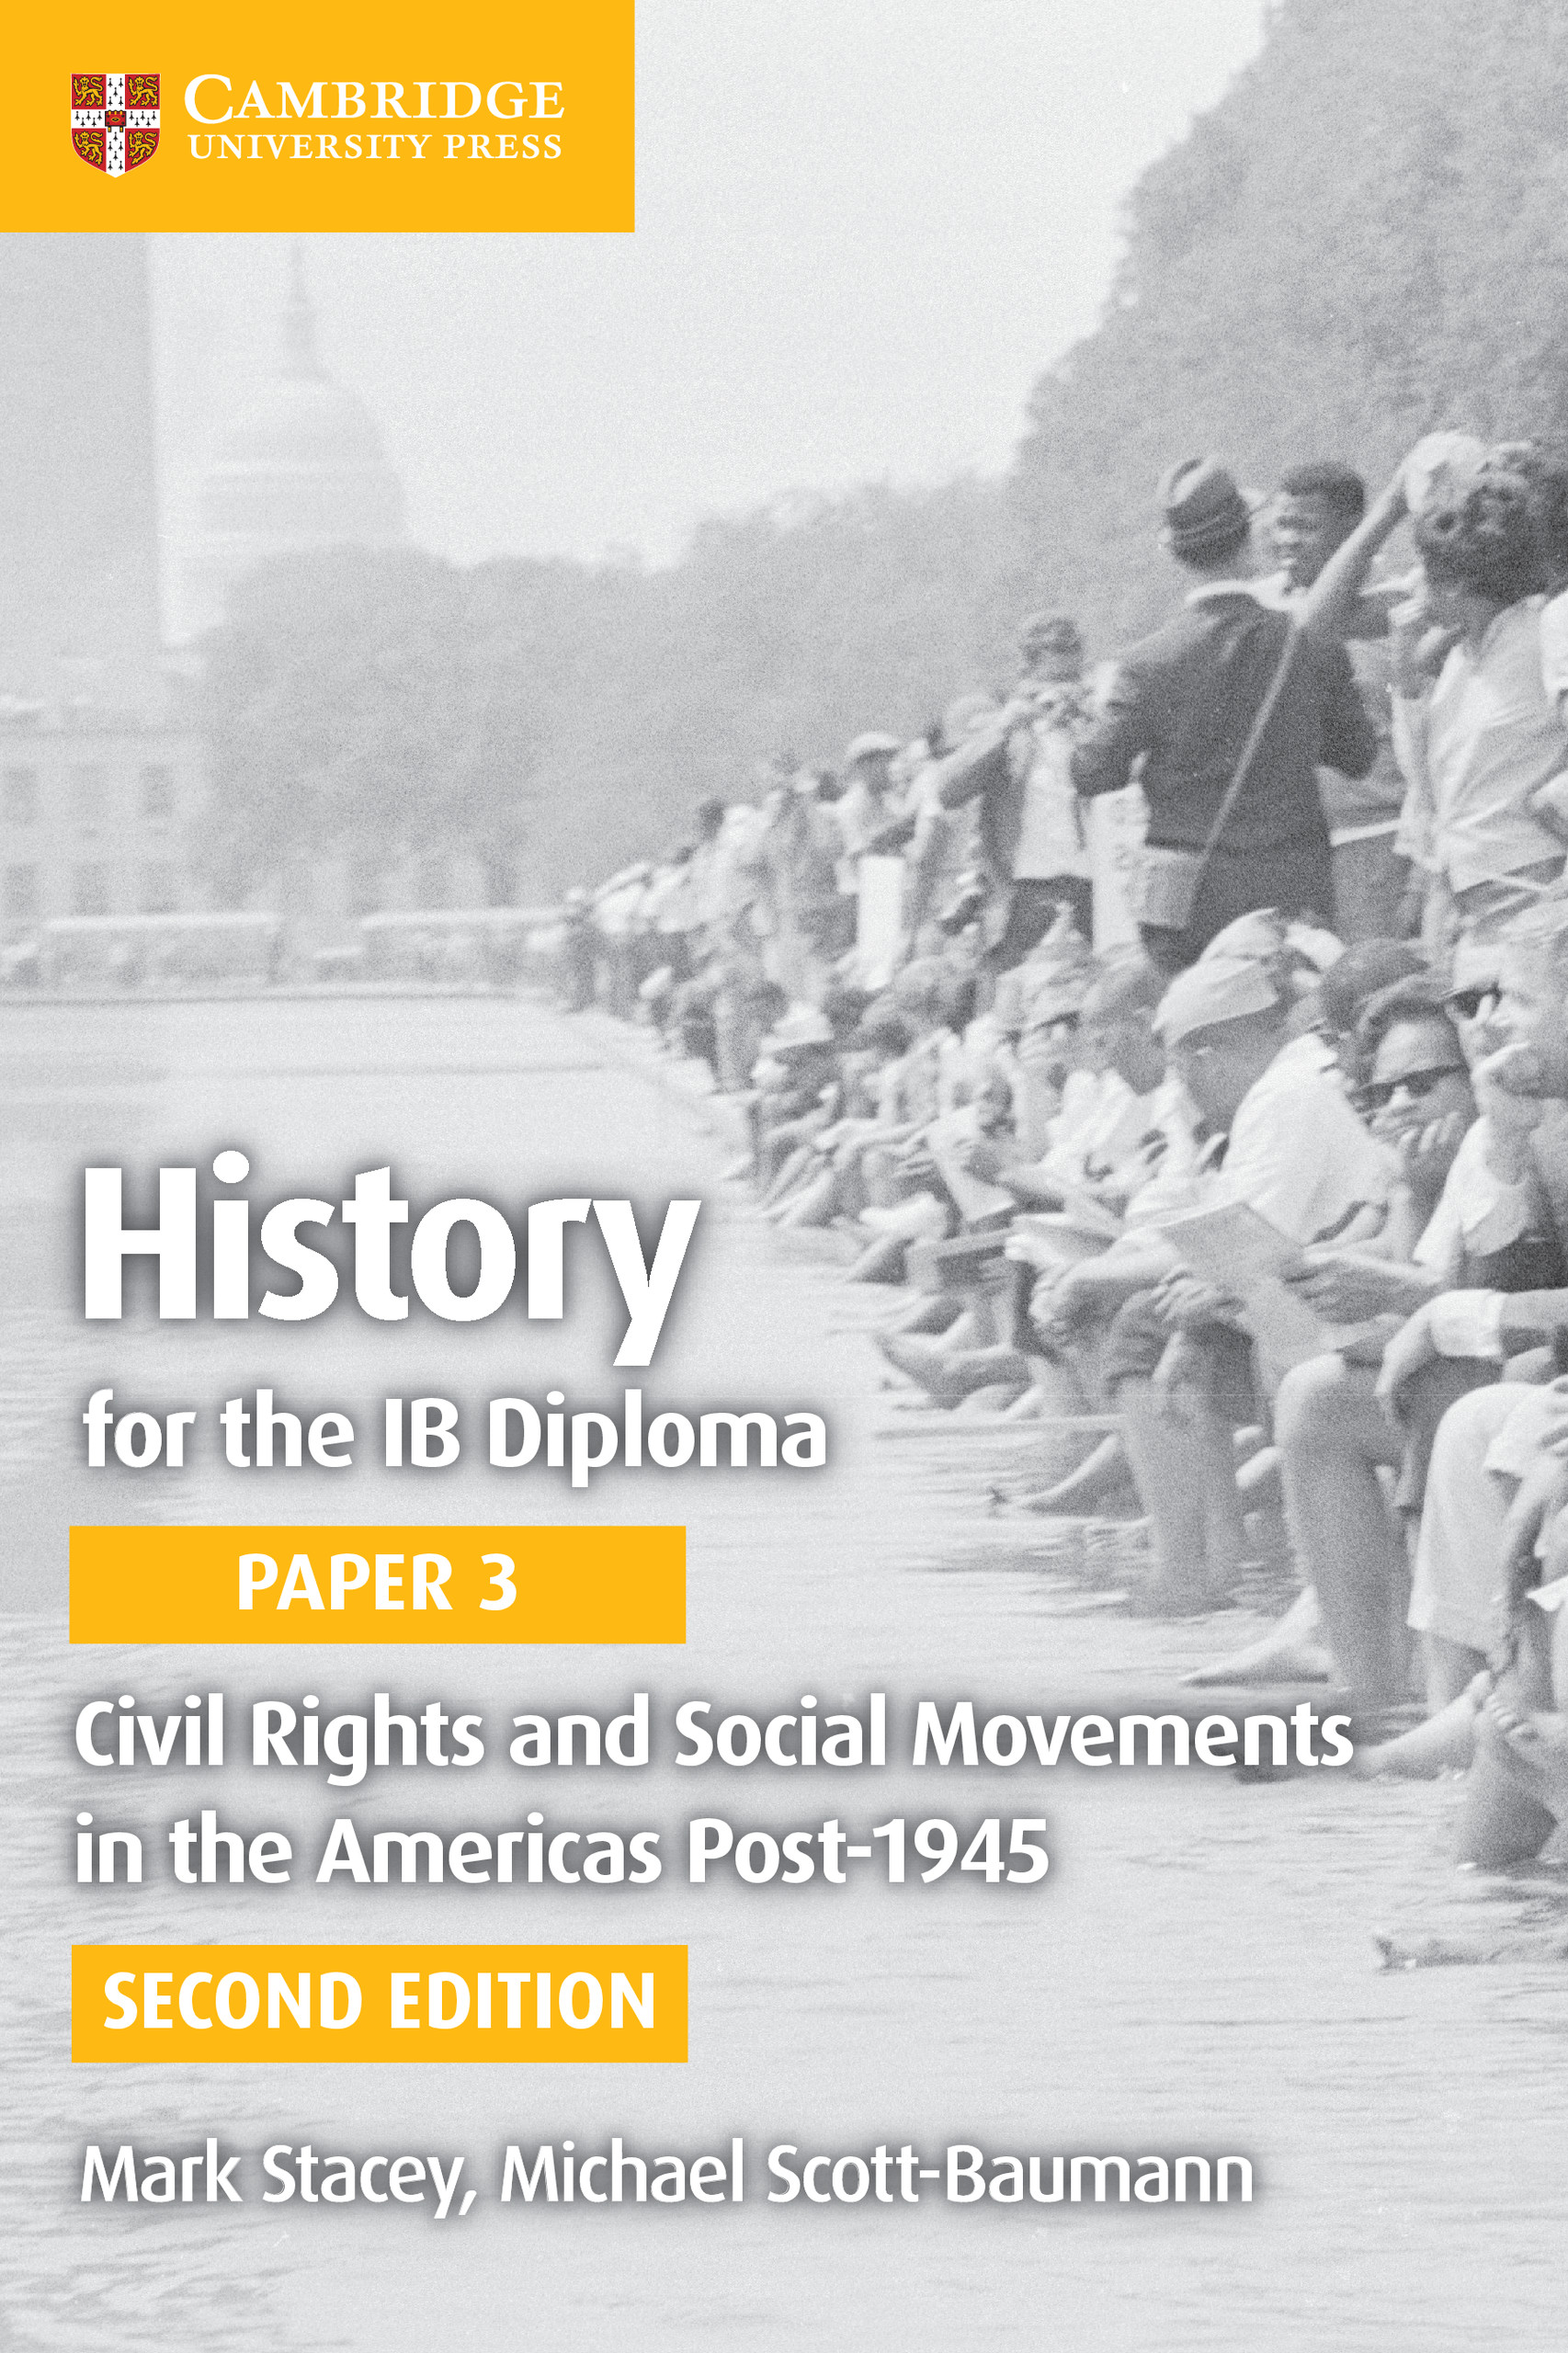 IB History Paper 3: Civil Rights and Social Movements in the Americas